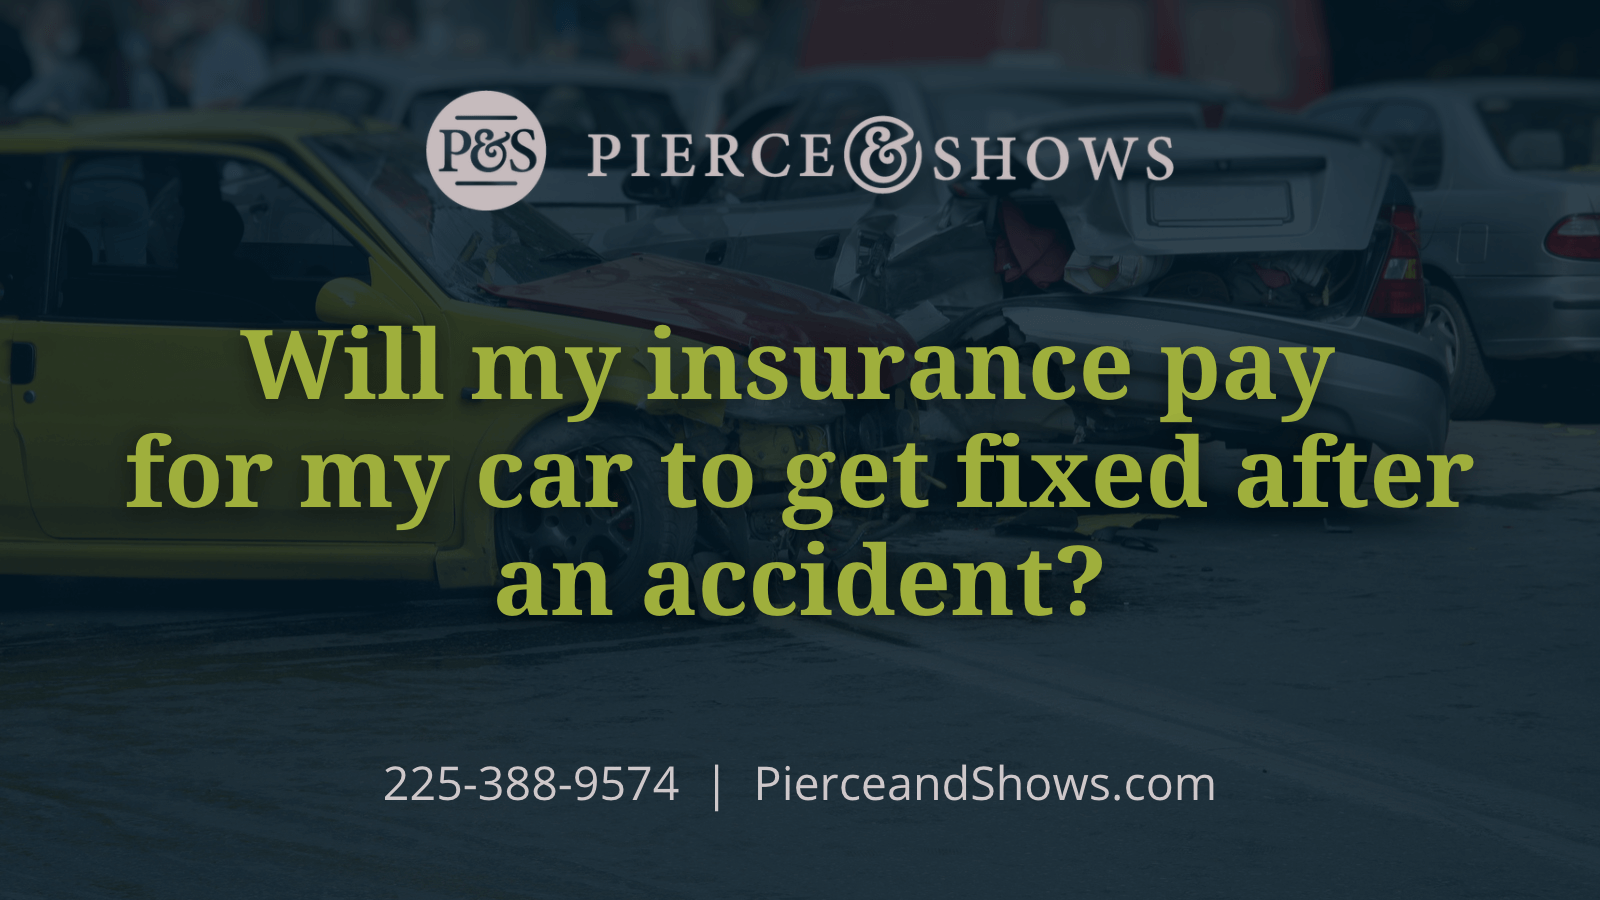 Will my insurance pay for my car to get fixed after an accident - Baton Rouge Louisiana injury attorney Pierce & Shows